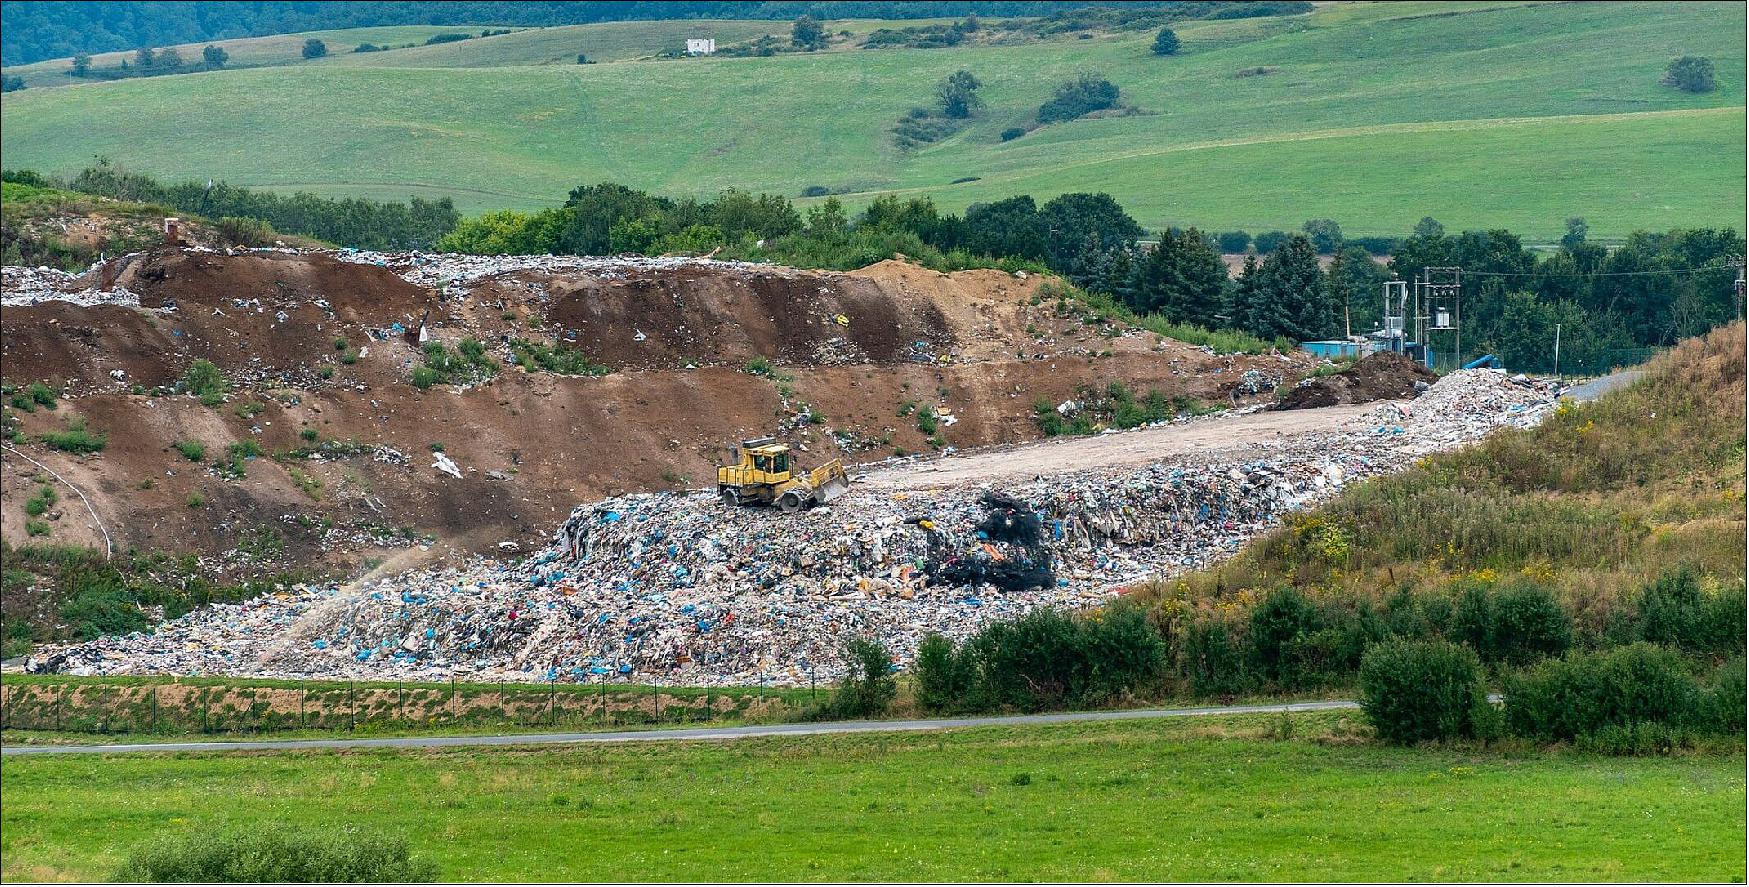 Figure 10: Photo of the Landfill site near Madrid, Spain (credit: Pixabay)